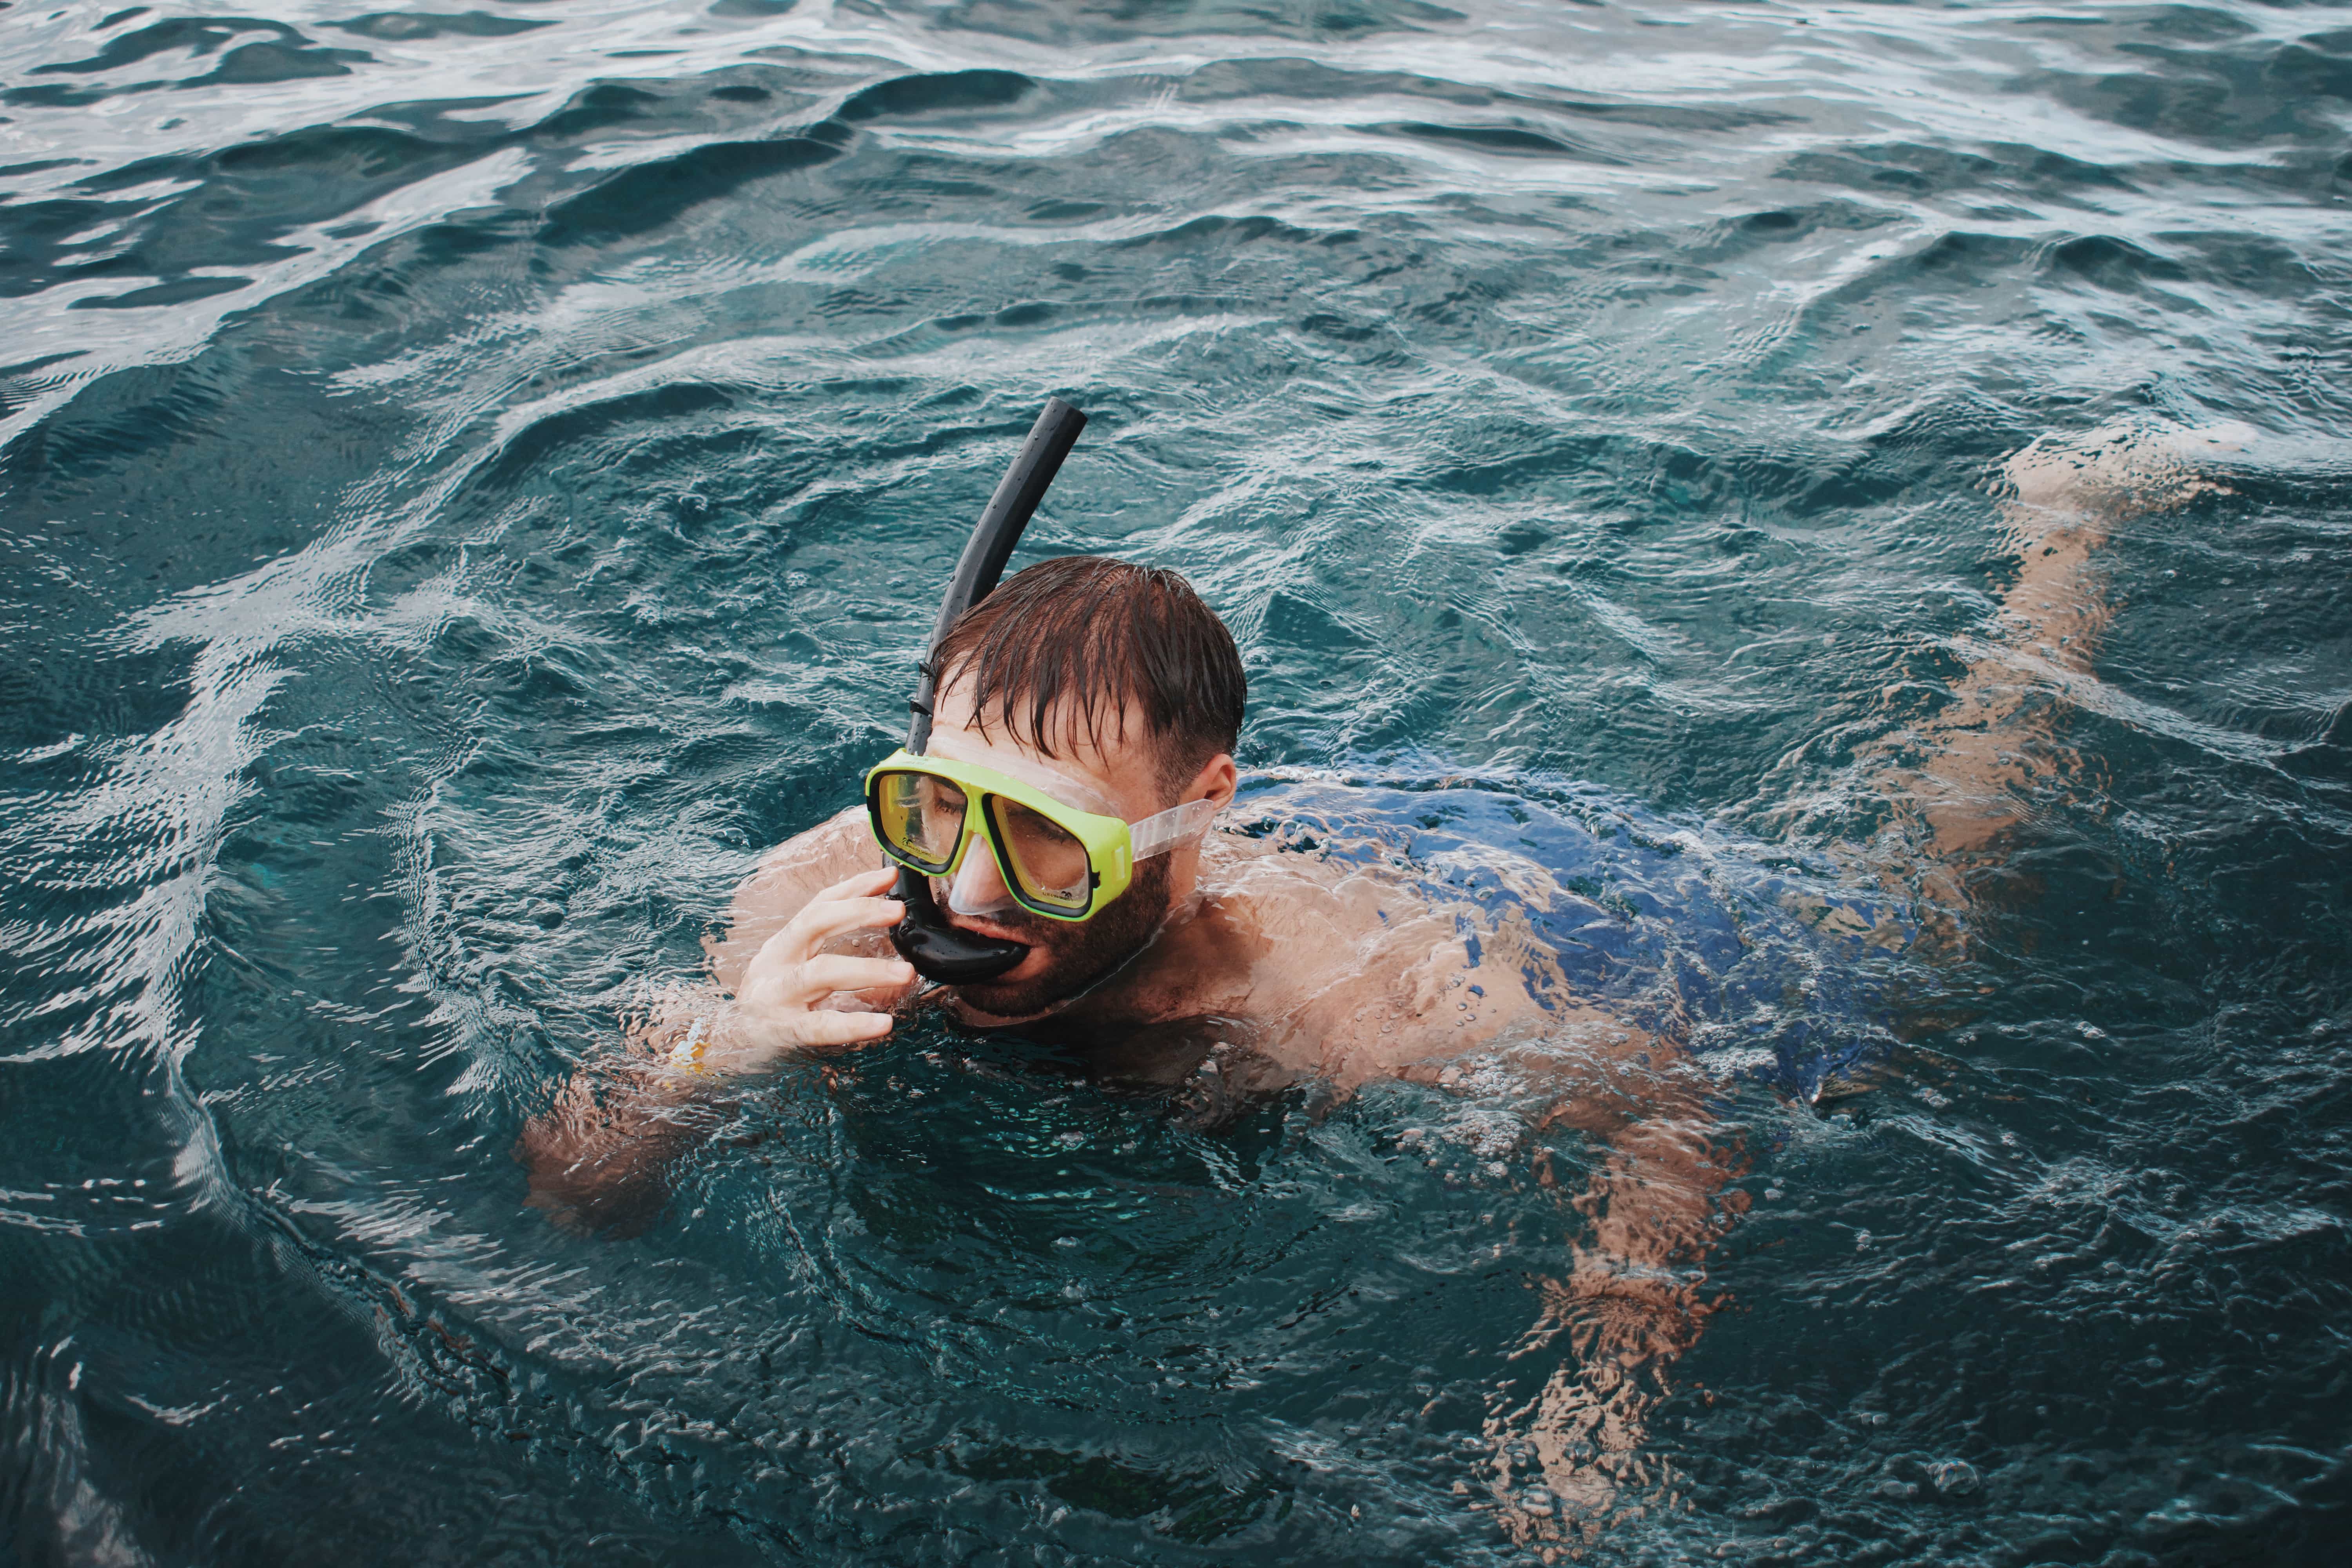 Nusa Lembongan has a rich underwater experience. Even snorkeling is really good.